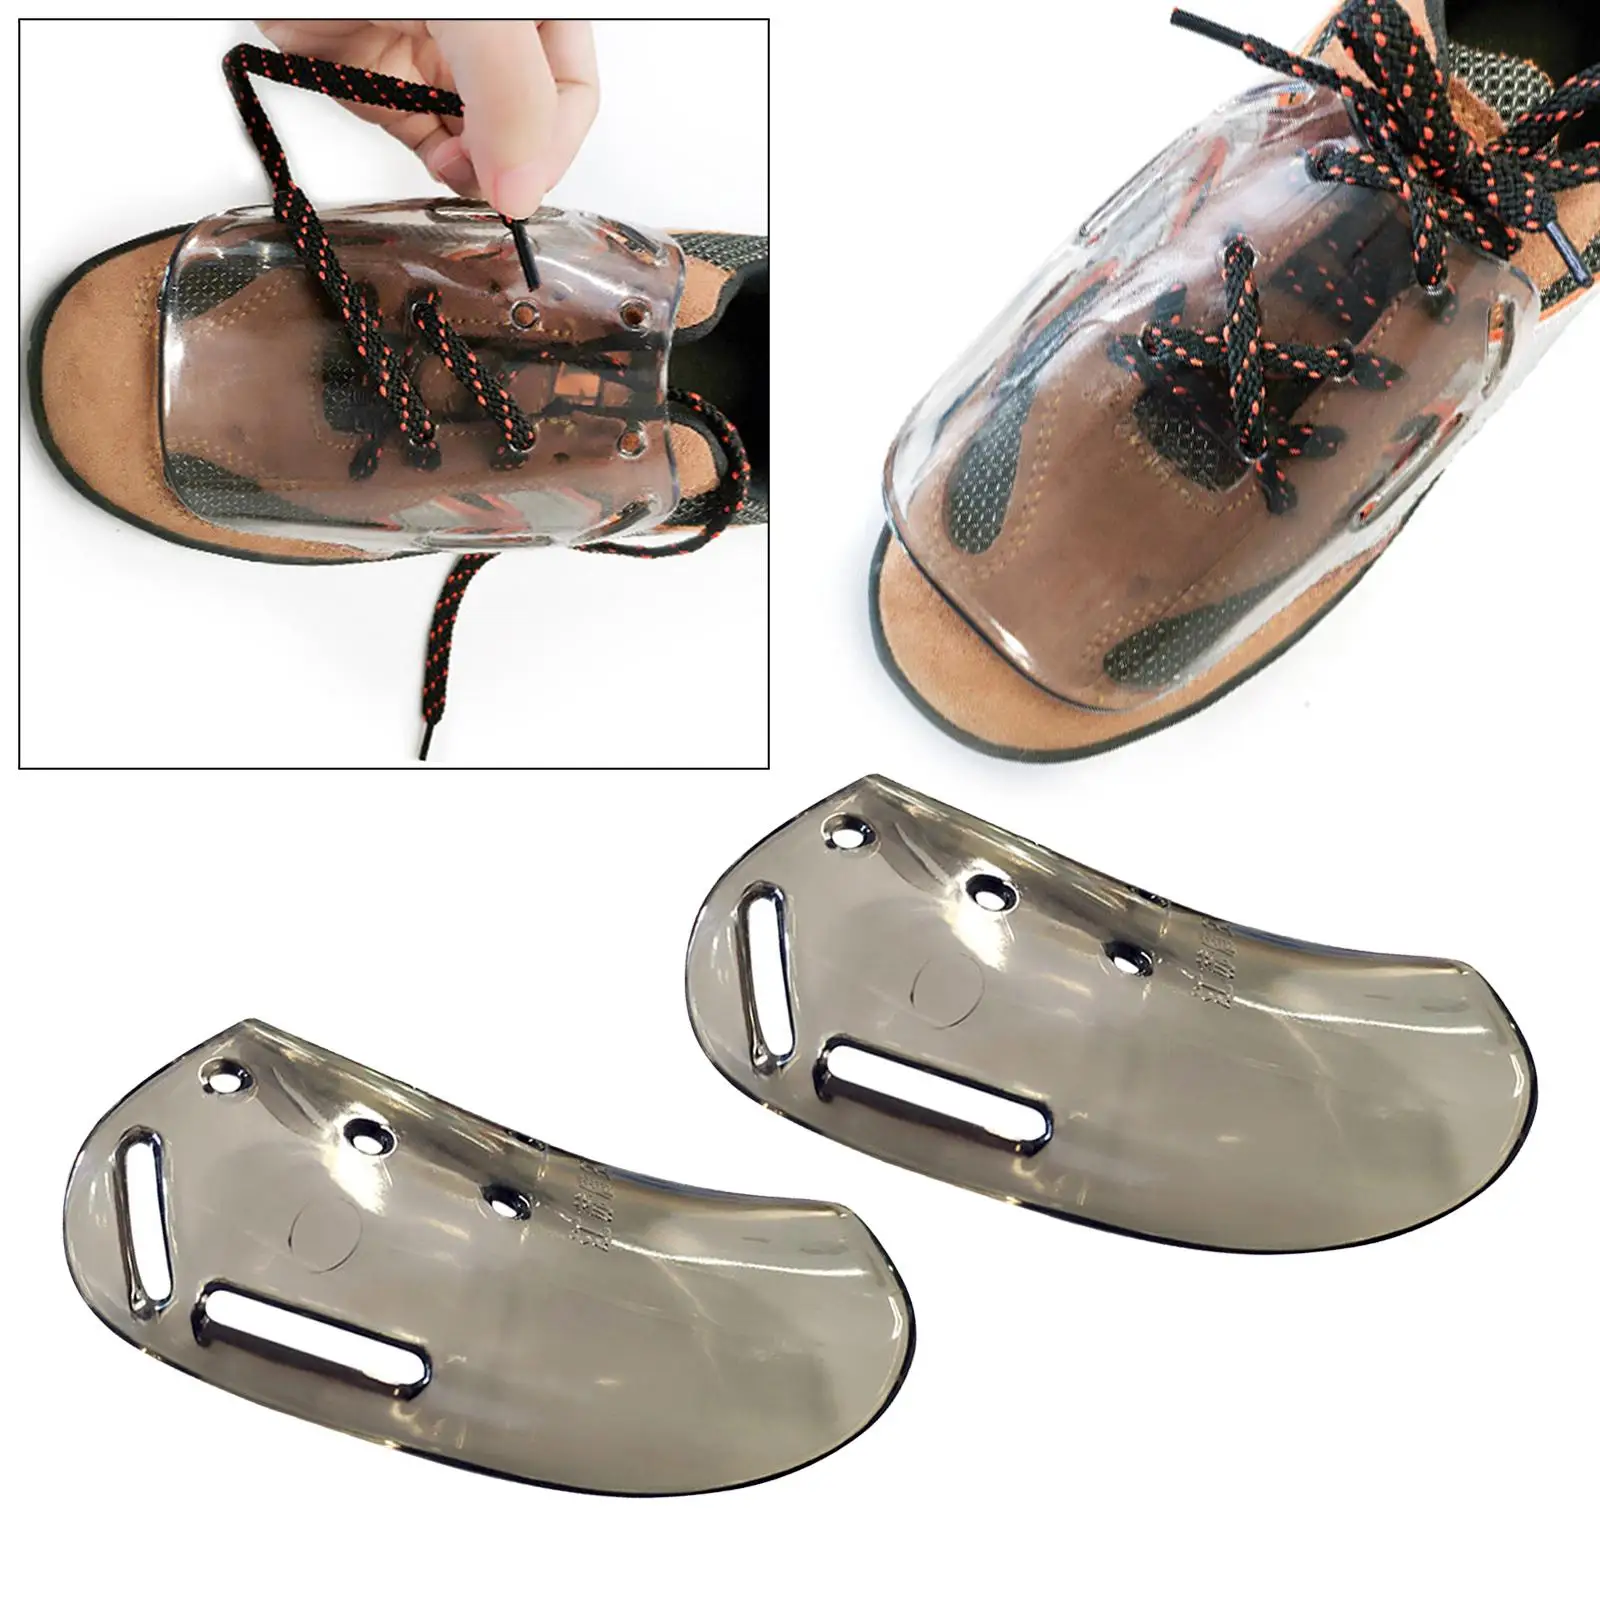 2 Pieces External Metatarsal Guard Universal Welder Shoe Cover for 